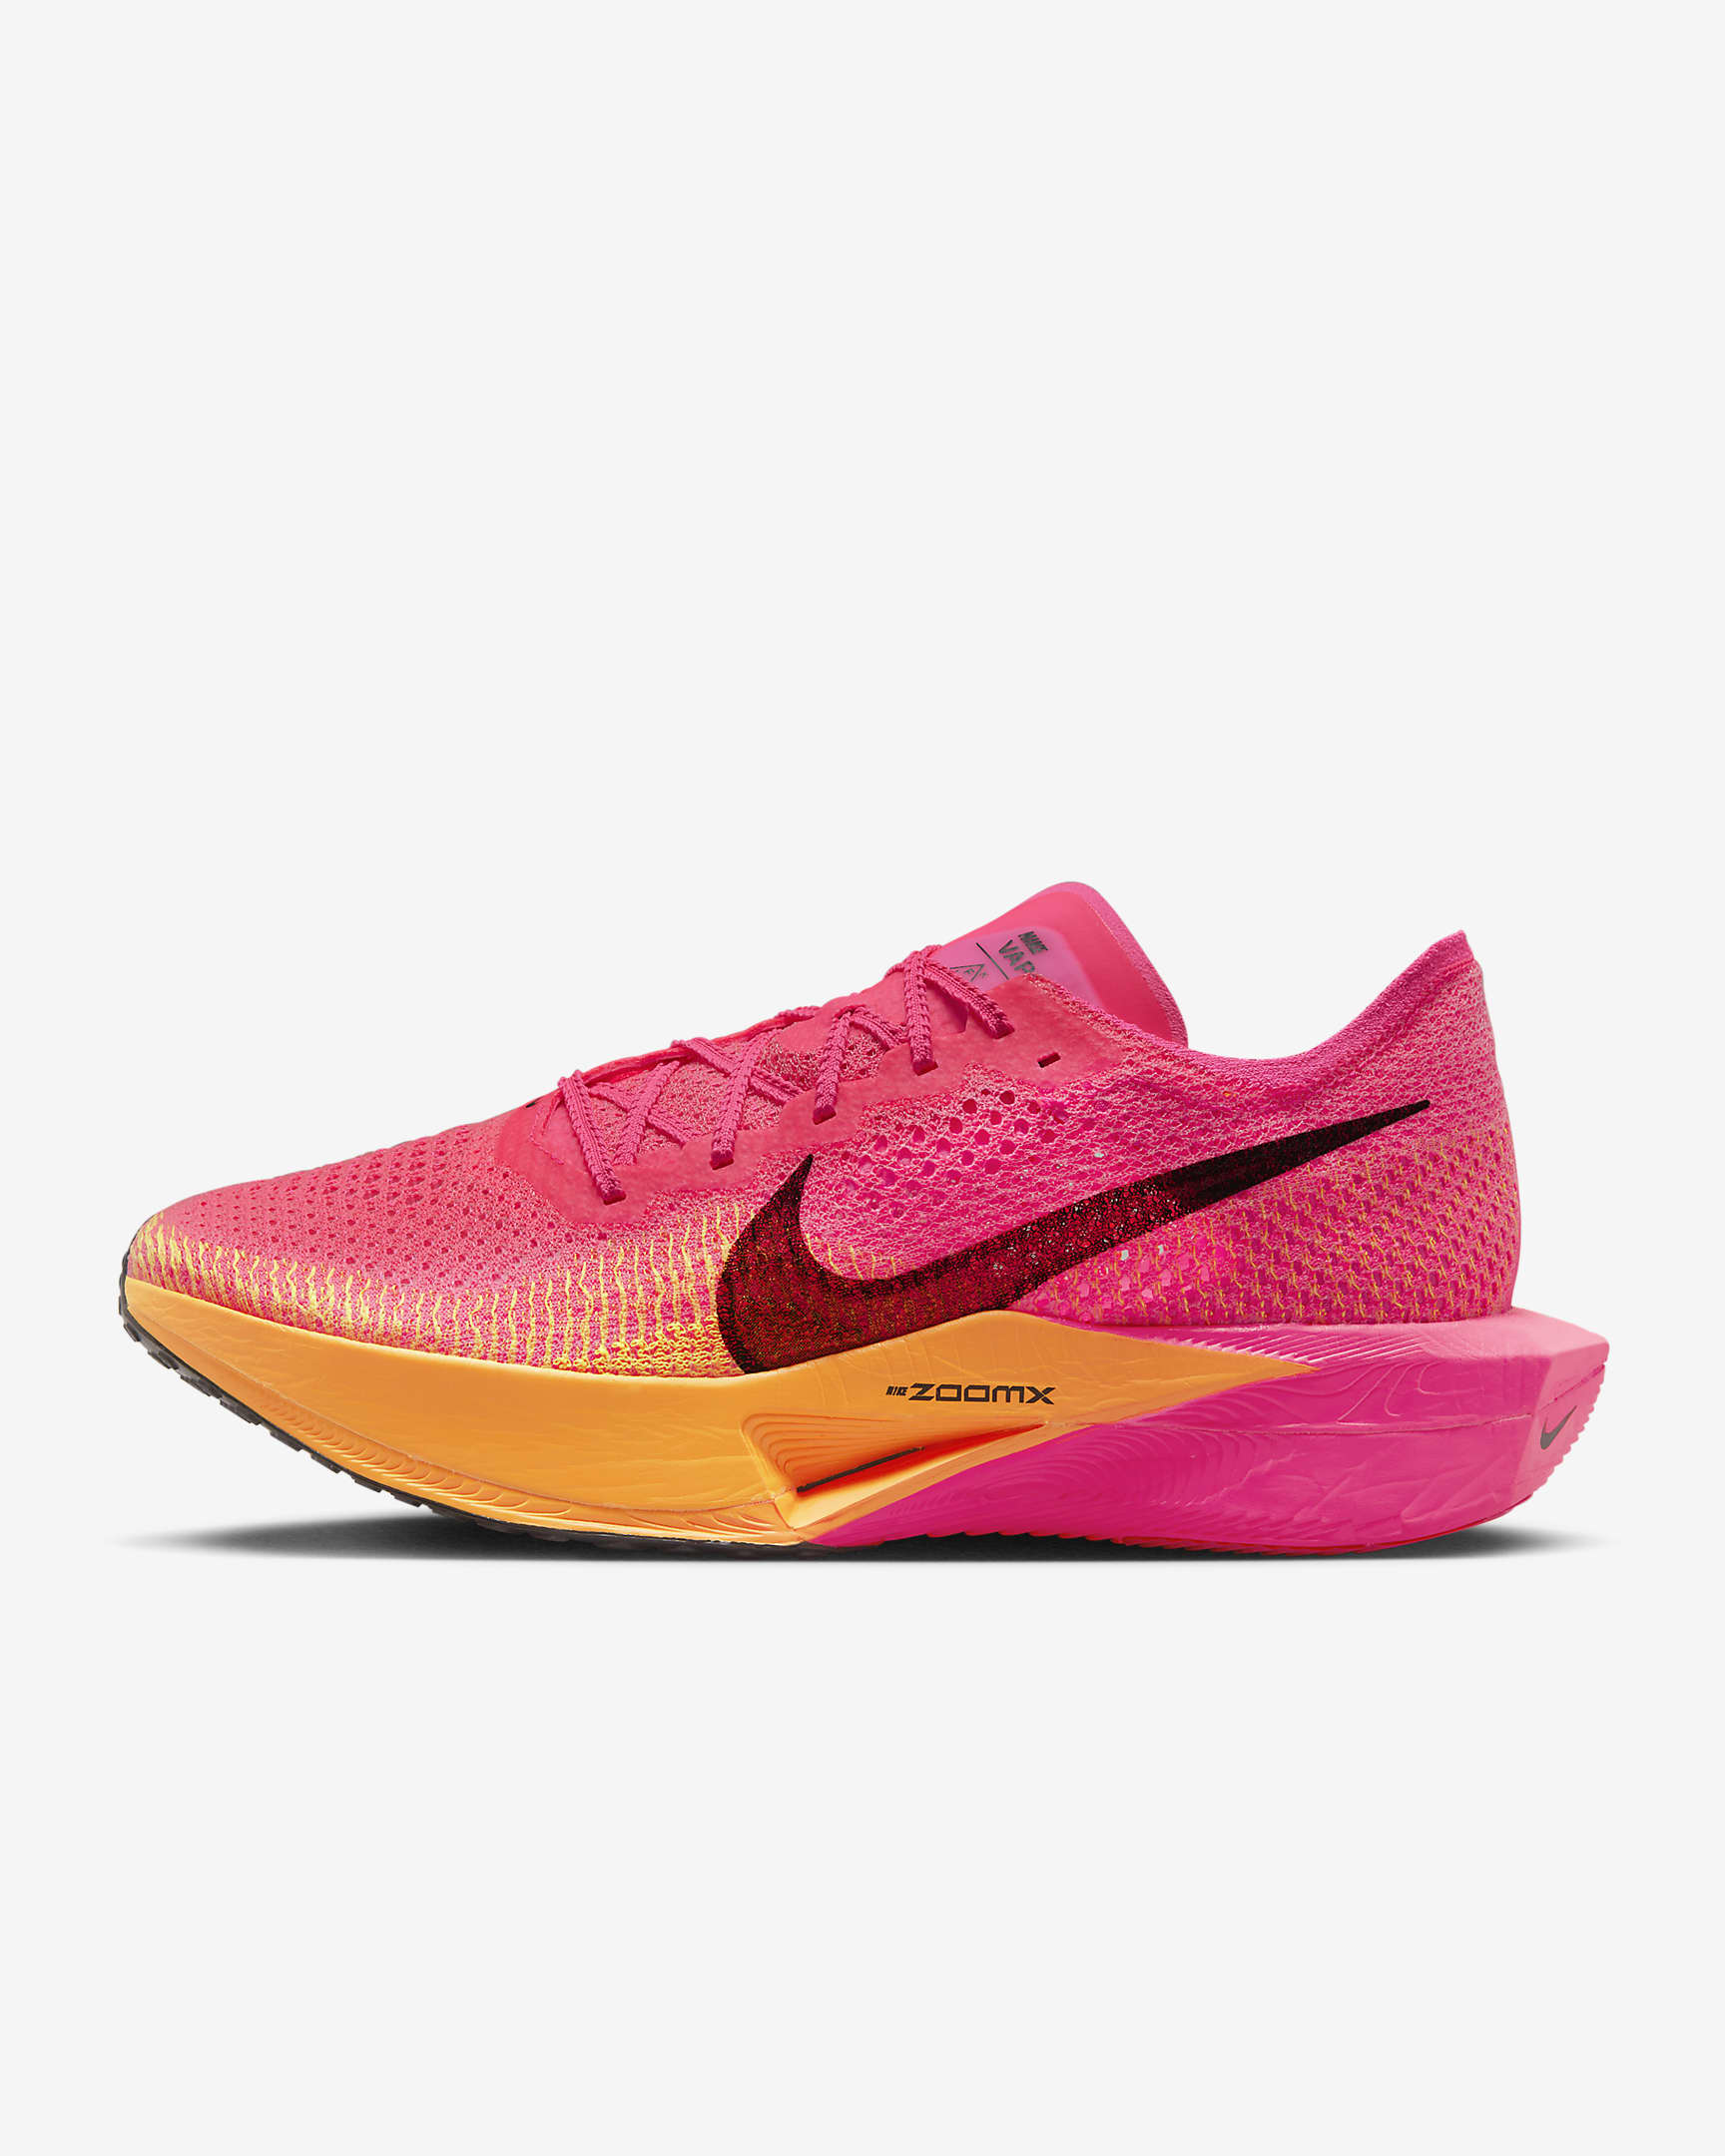 Nike Vaporfly 3 road racing shoes